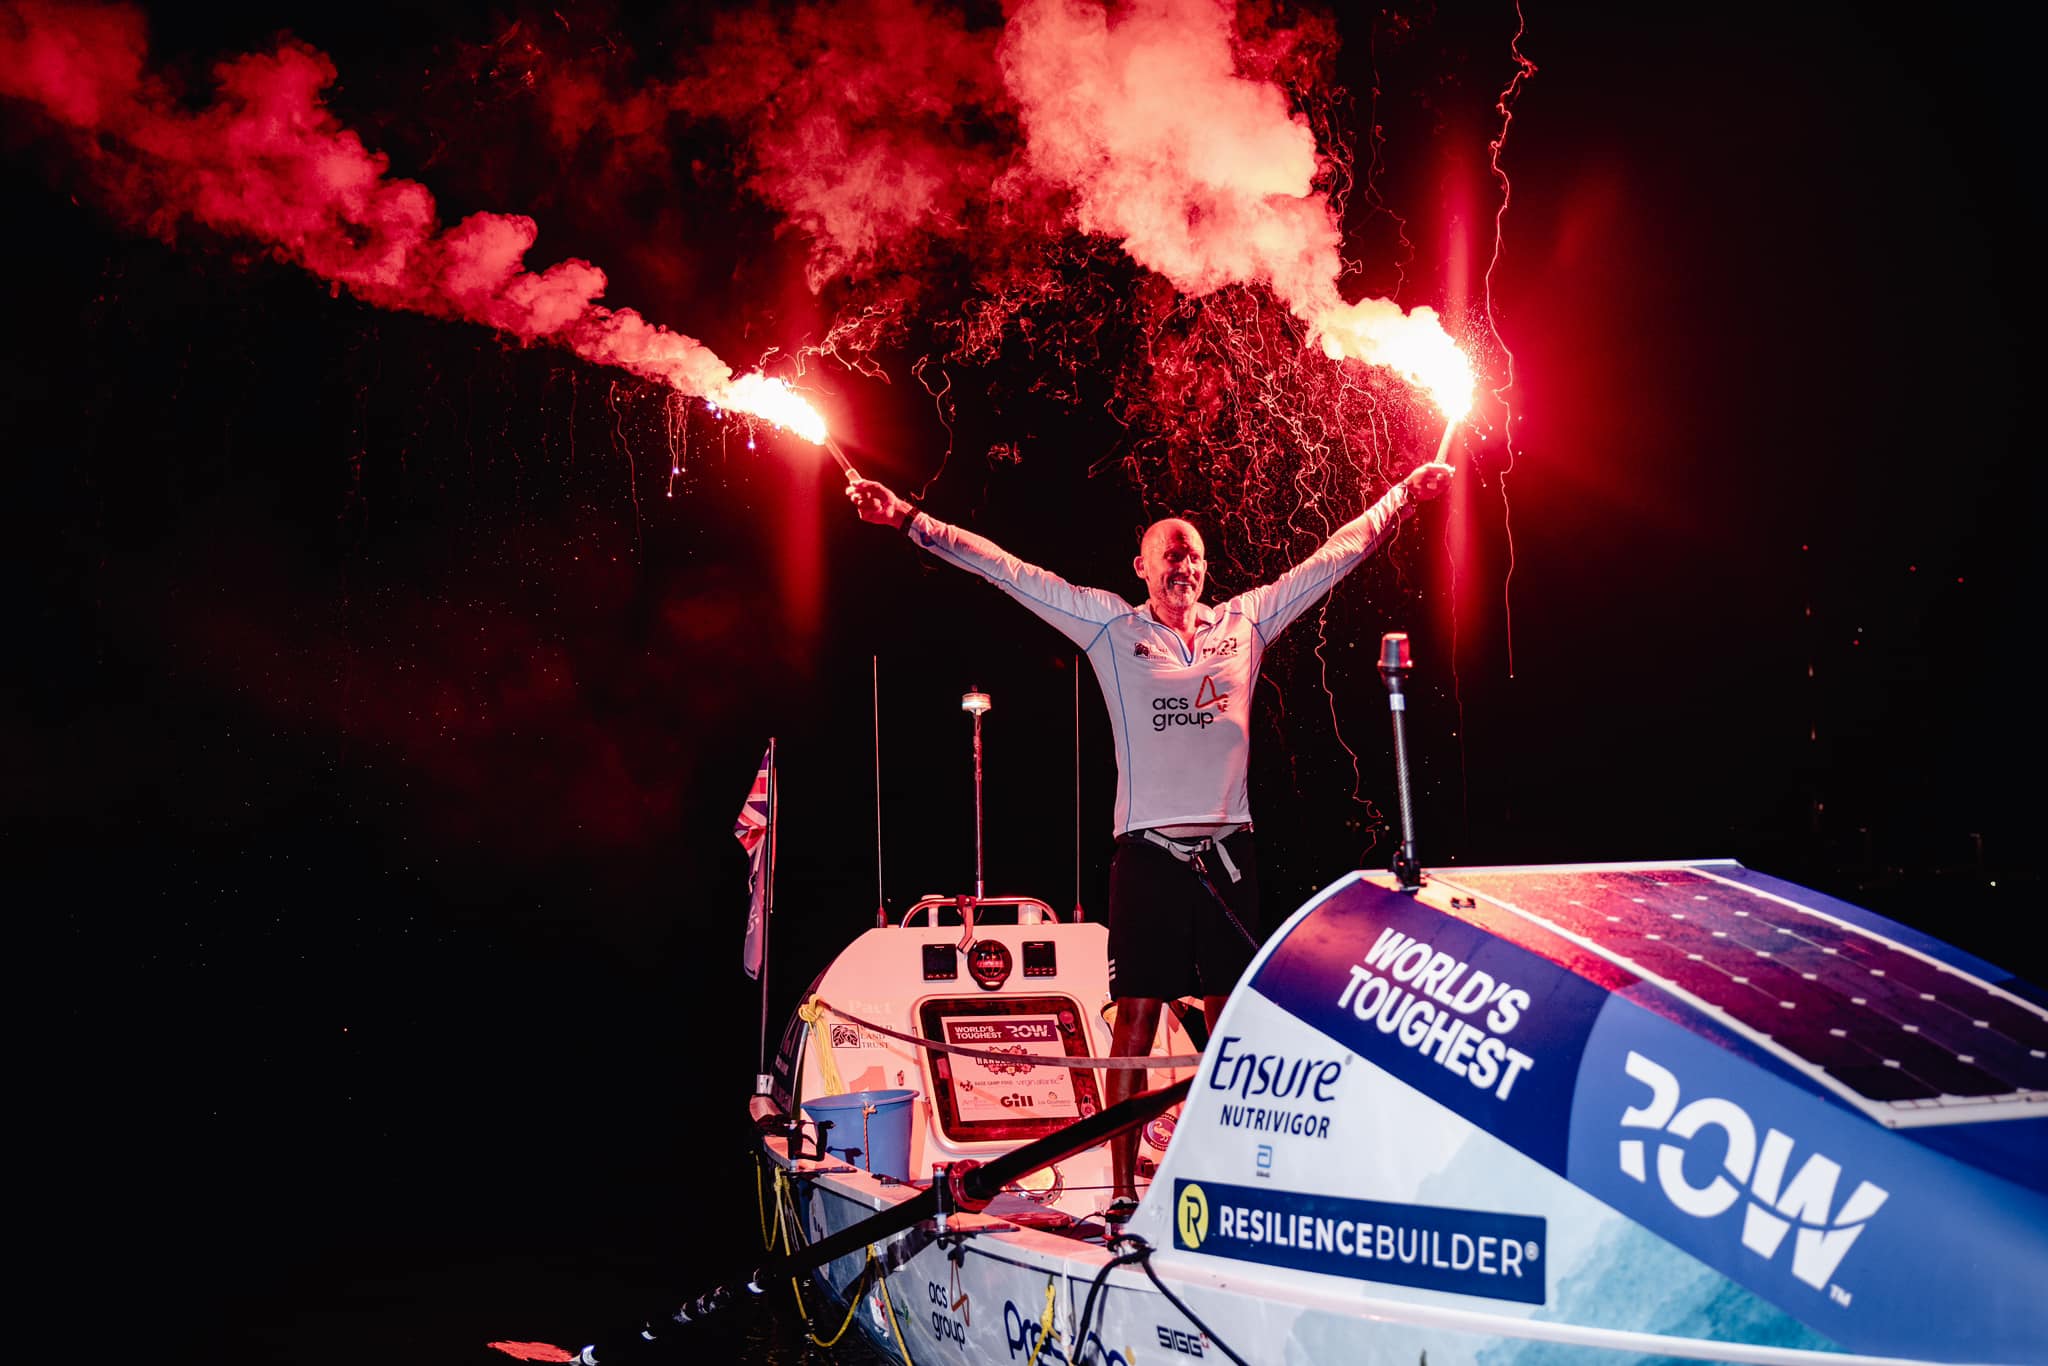 A man stands on a rowing boat in the darkness, lighting up the air with two red flares which he holds high in the air with his hands. The flares give off red tinted smoke.